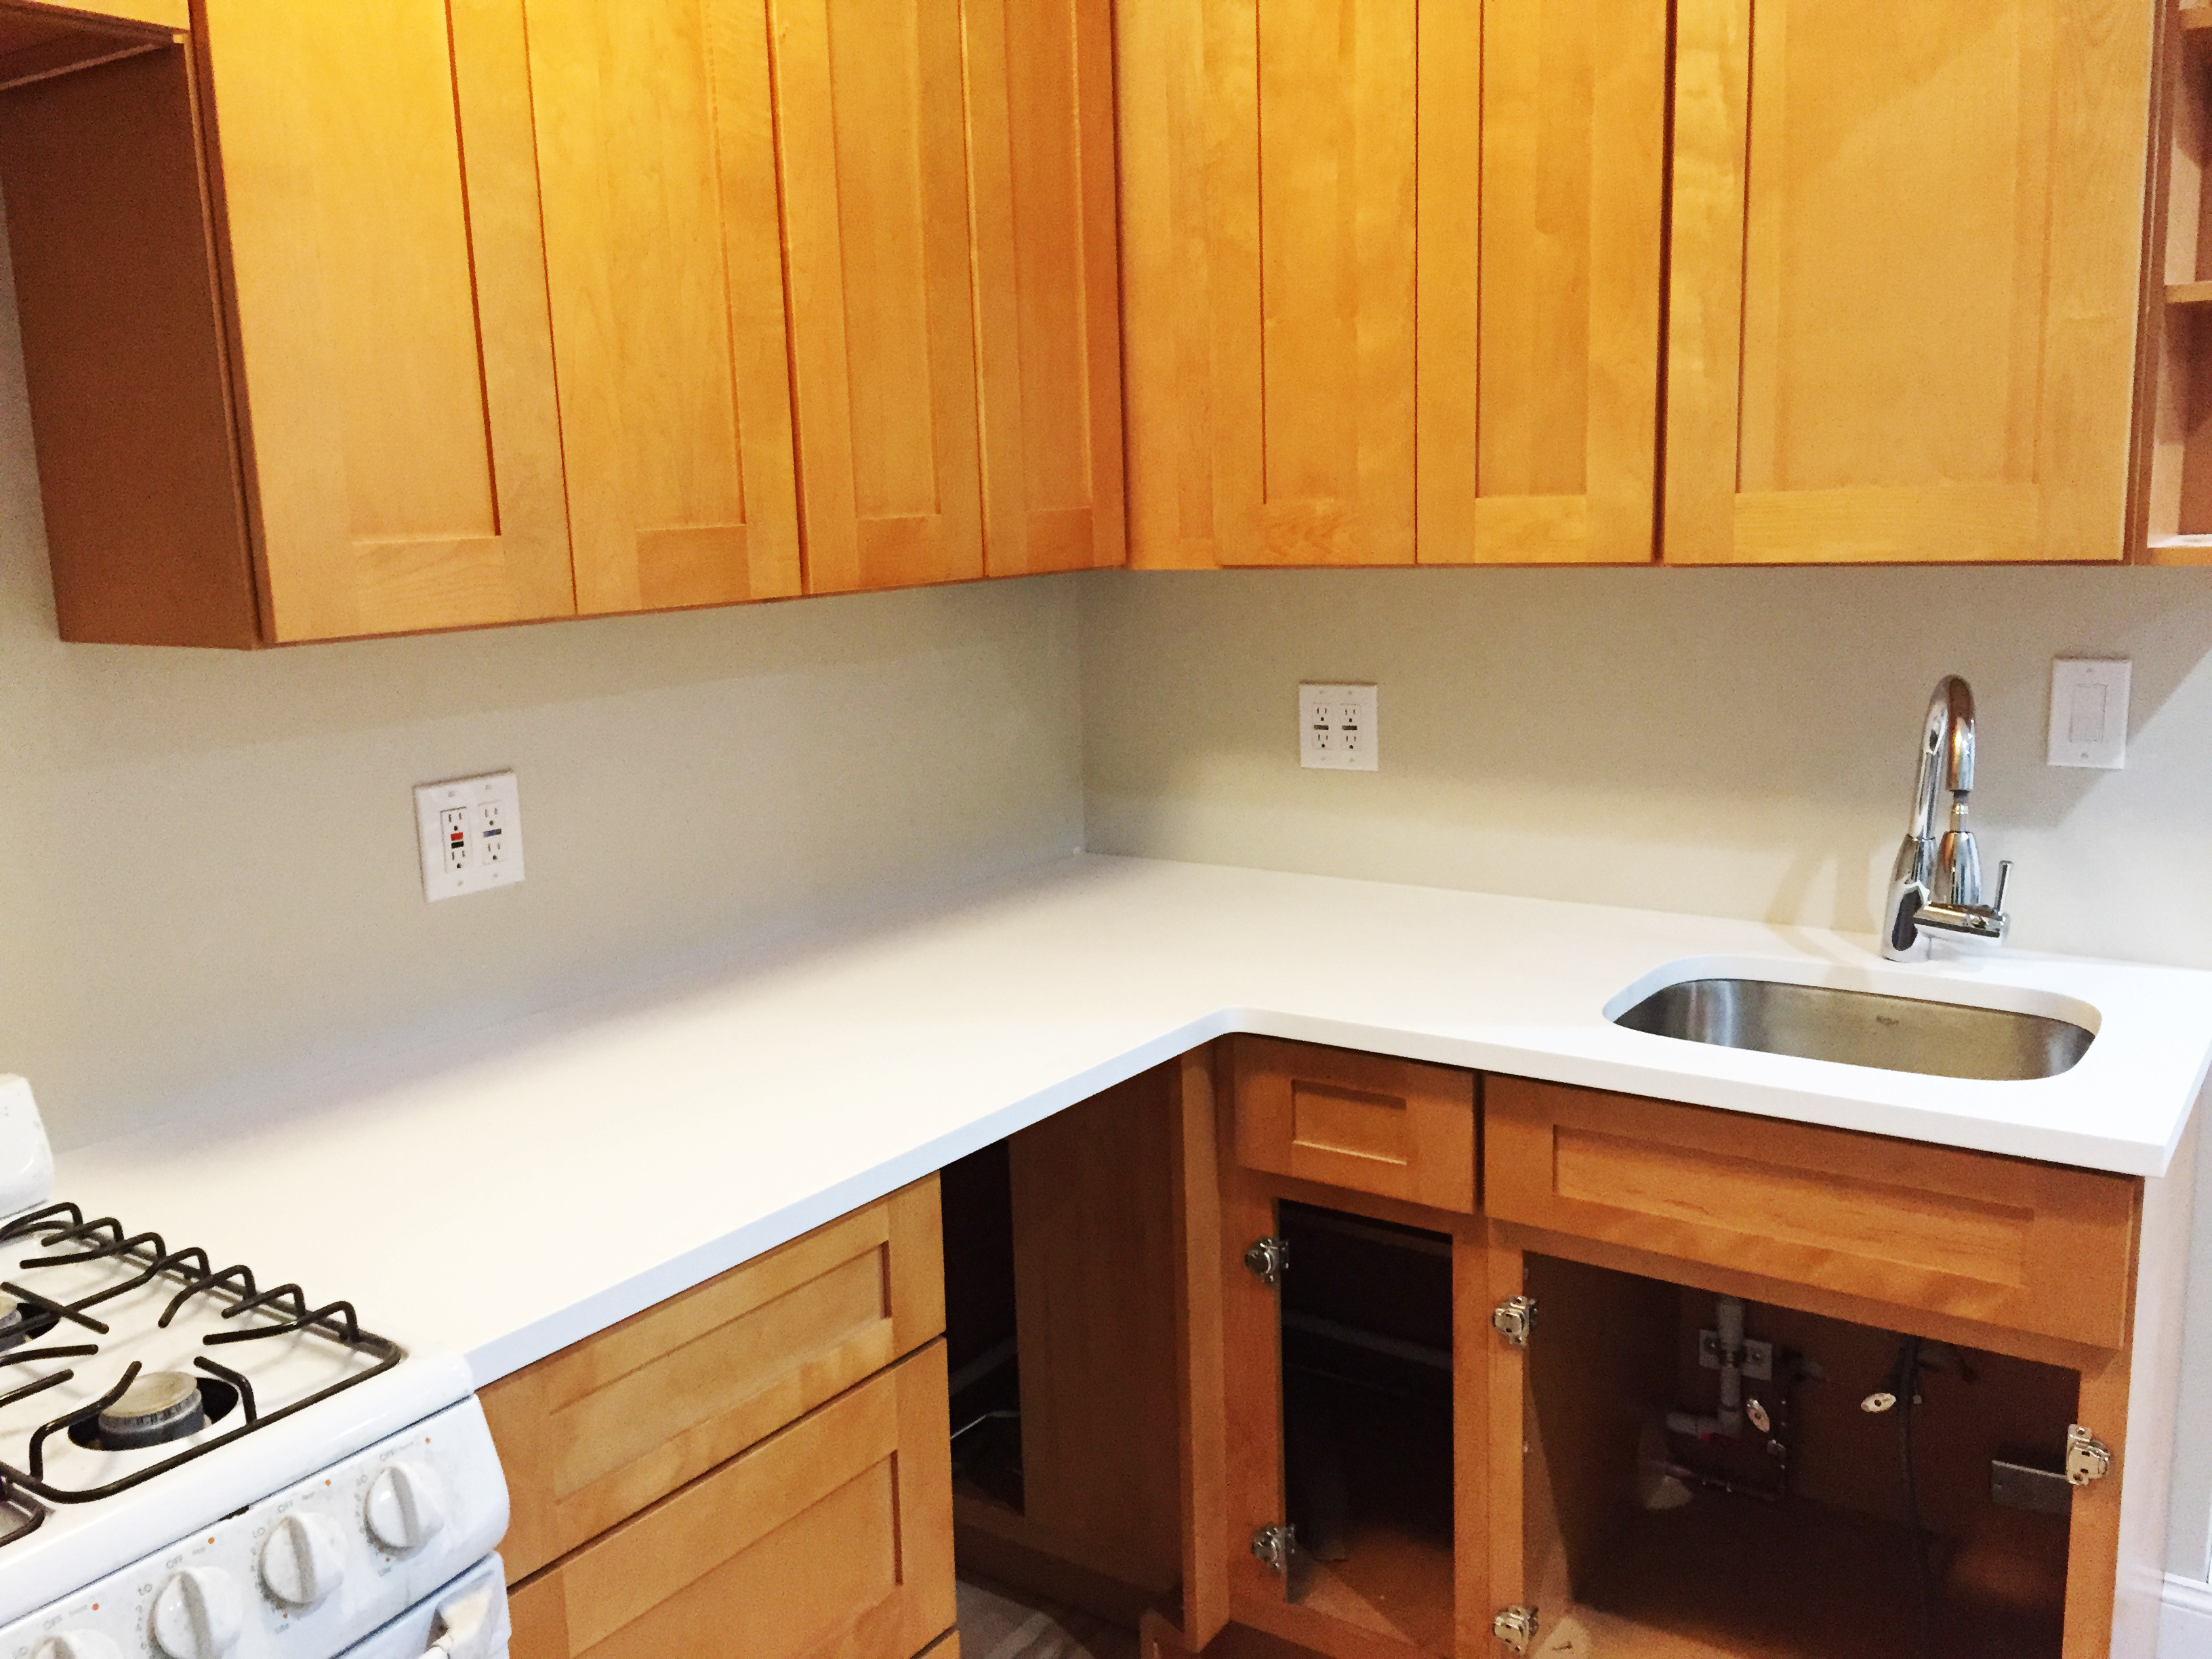 Kitchen Design Mistakes: Cabinet Filler Strips and Panels